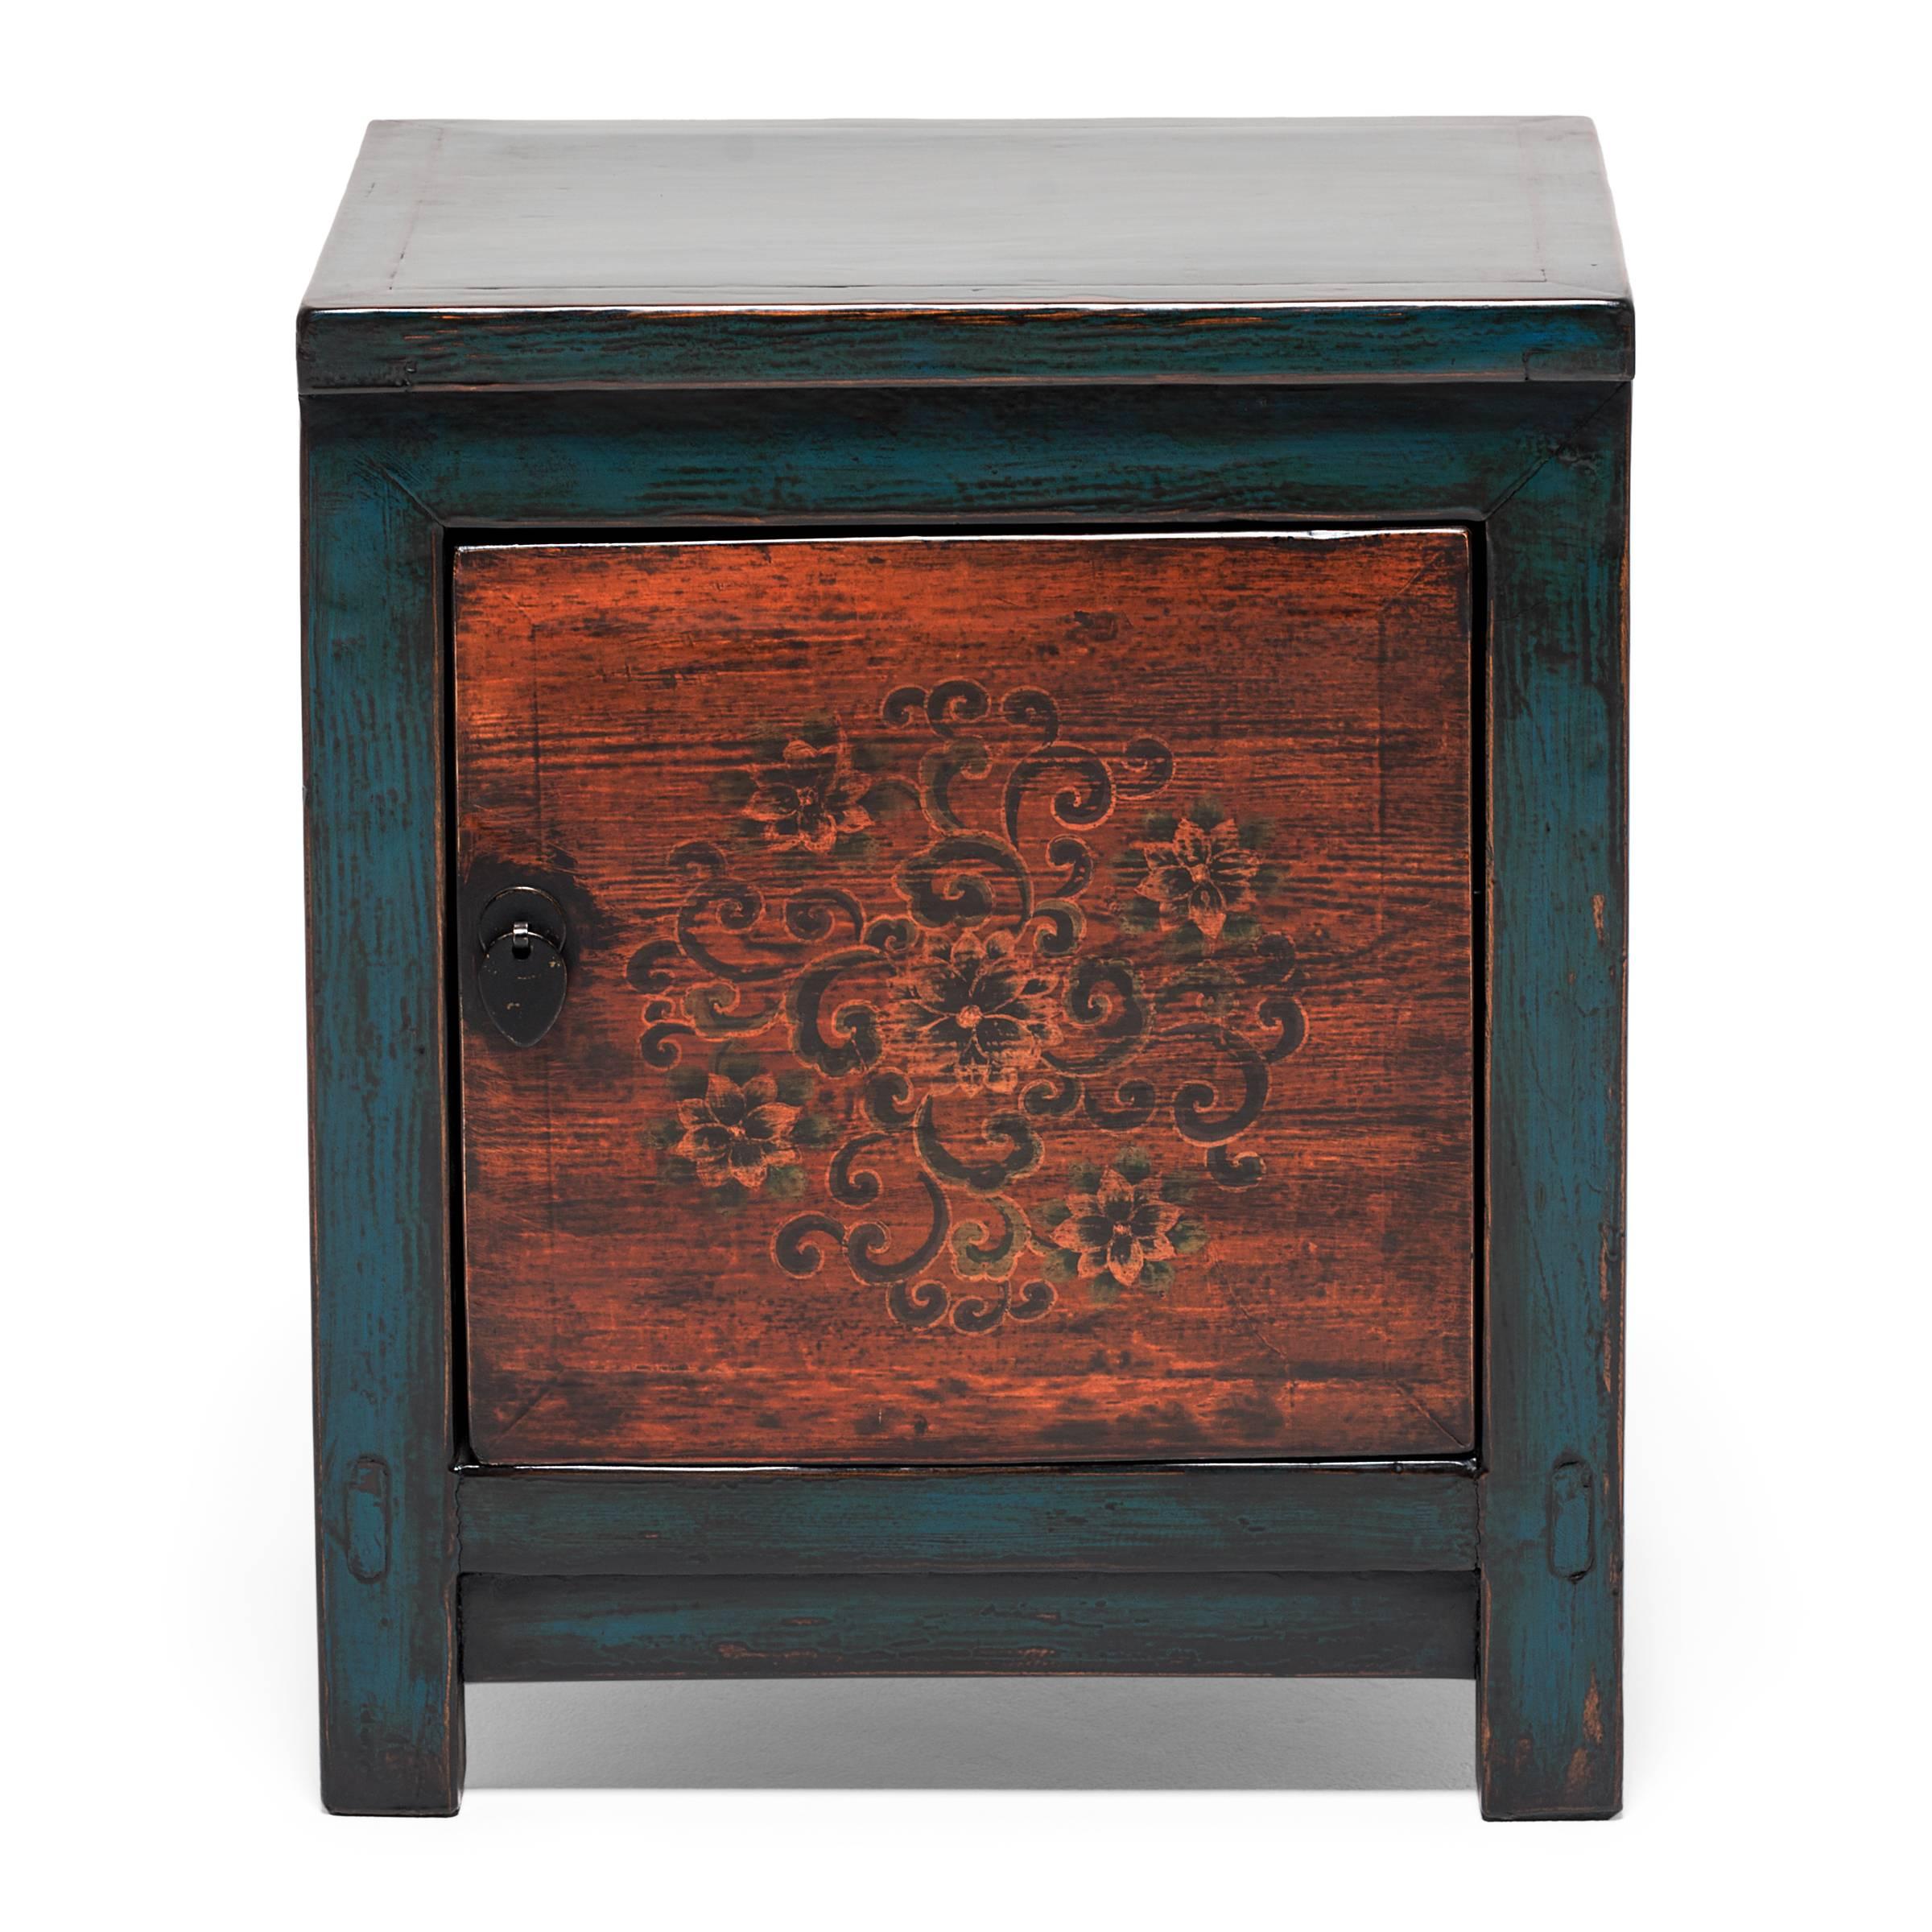 Made in Mongolia circa 1900, the original pine chest from which this pair was born was used for general household storage. The front panels are hand-painted with stylized chrysanthemum blossoms, the quintessential flower of autumn and a traditional